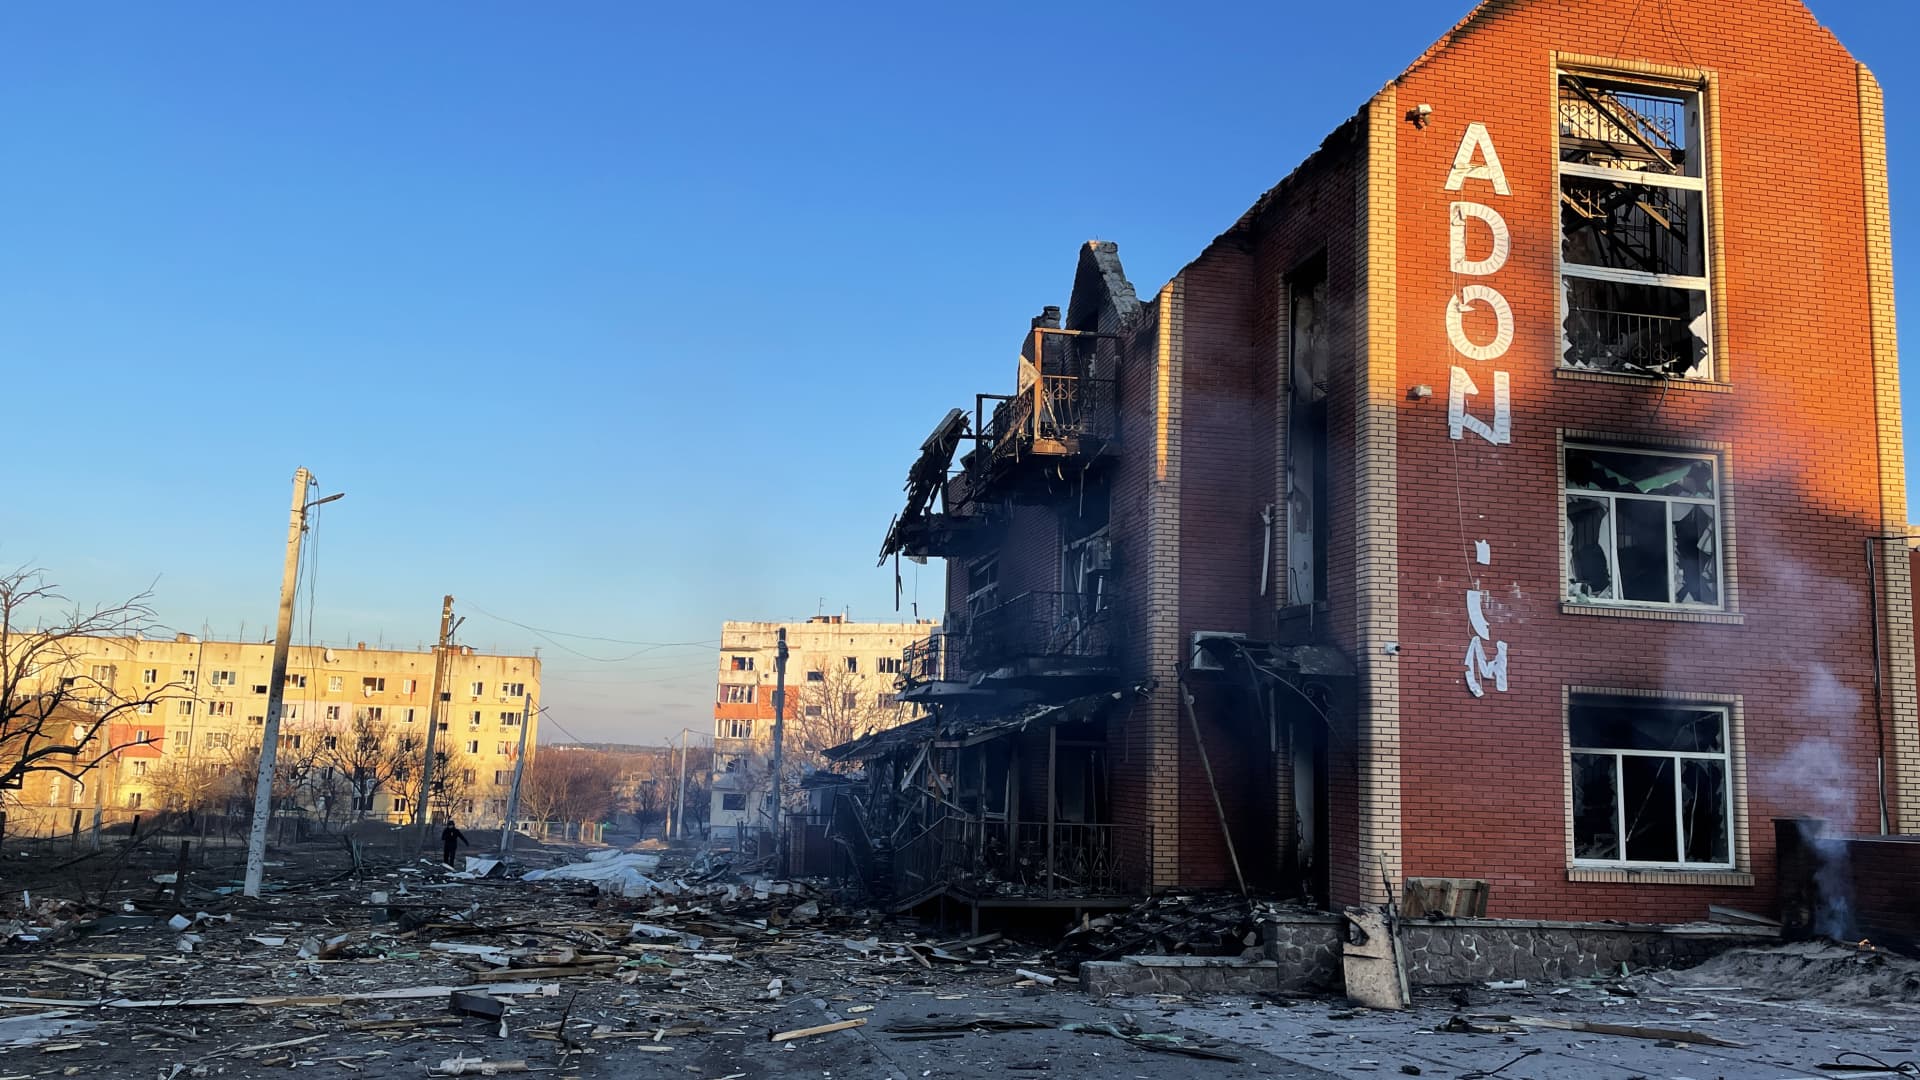 A Makariv residential building destroyed by Russian shelling is shown in an image taken March 16, 2022. The town near Kyiv is the scene of more fighting this week.